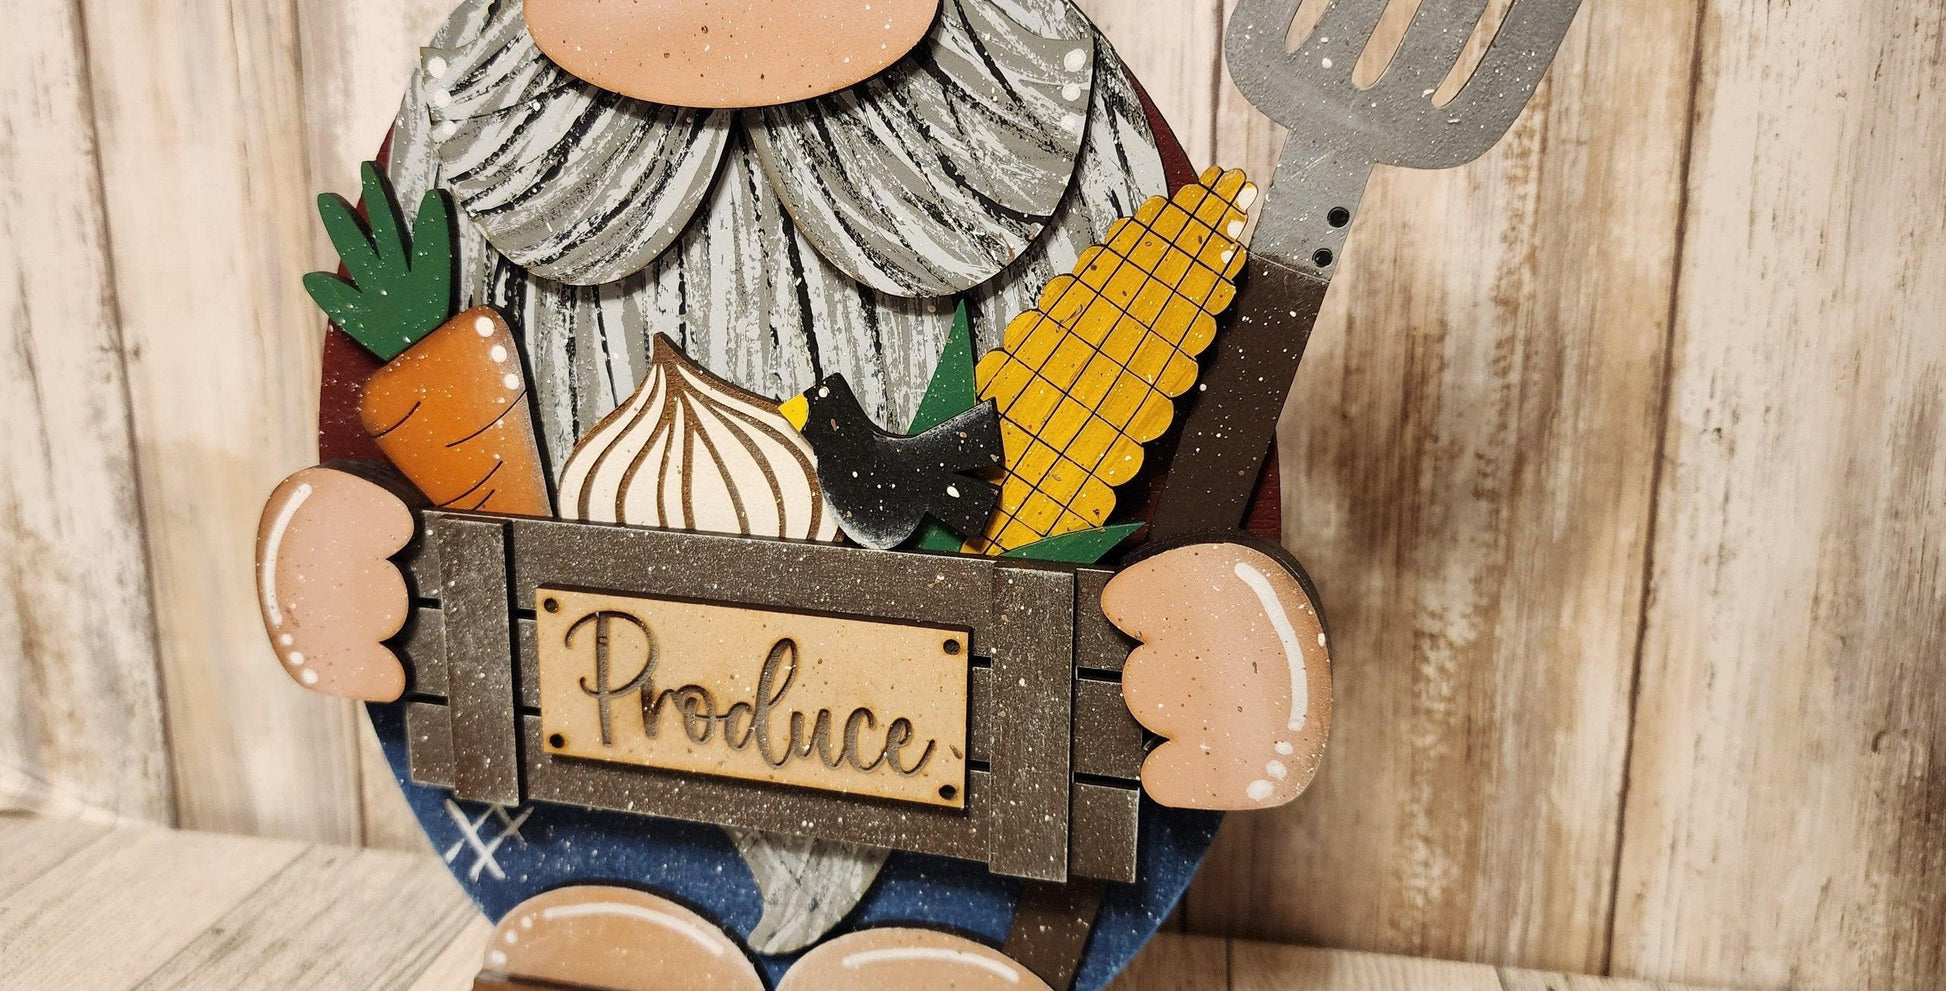 Premade Standing Farmer Gnome with vegetable basket Only one avaialbe - RusticFarmhouseDecor